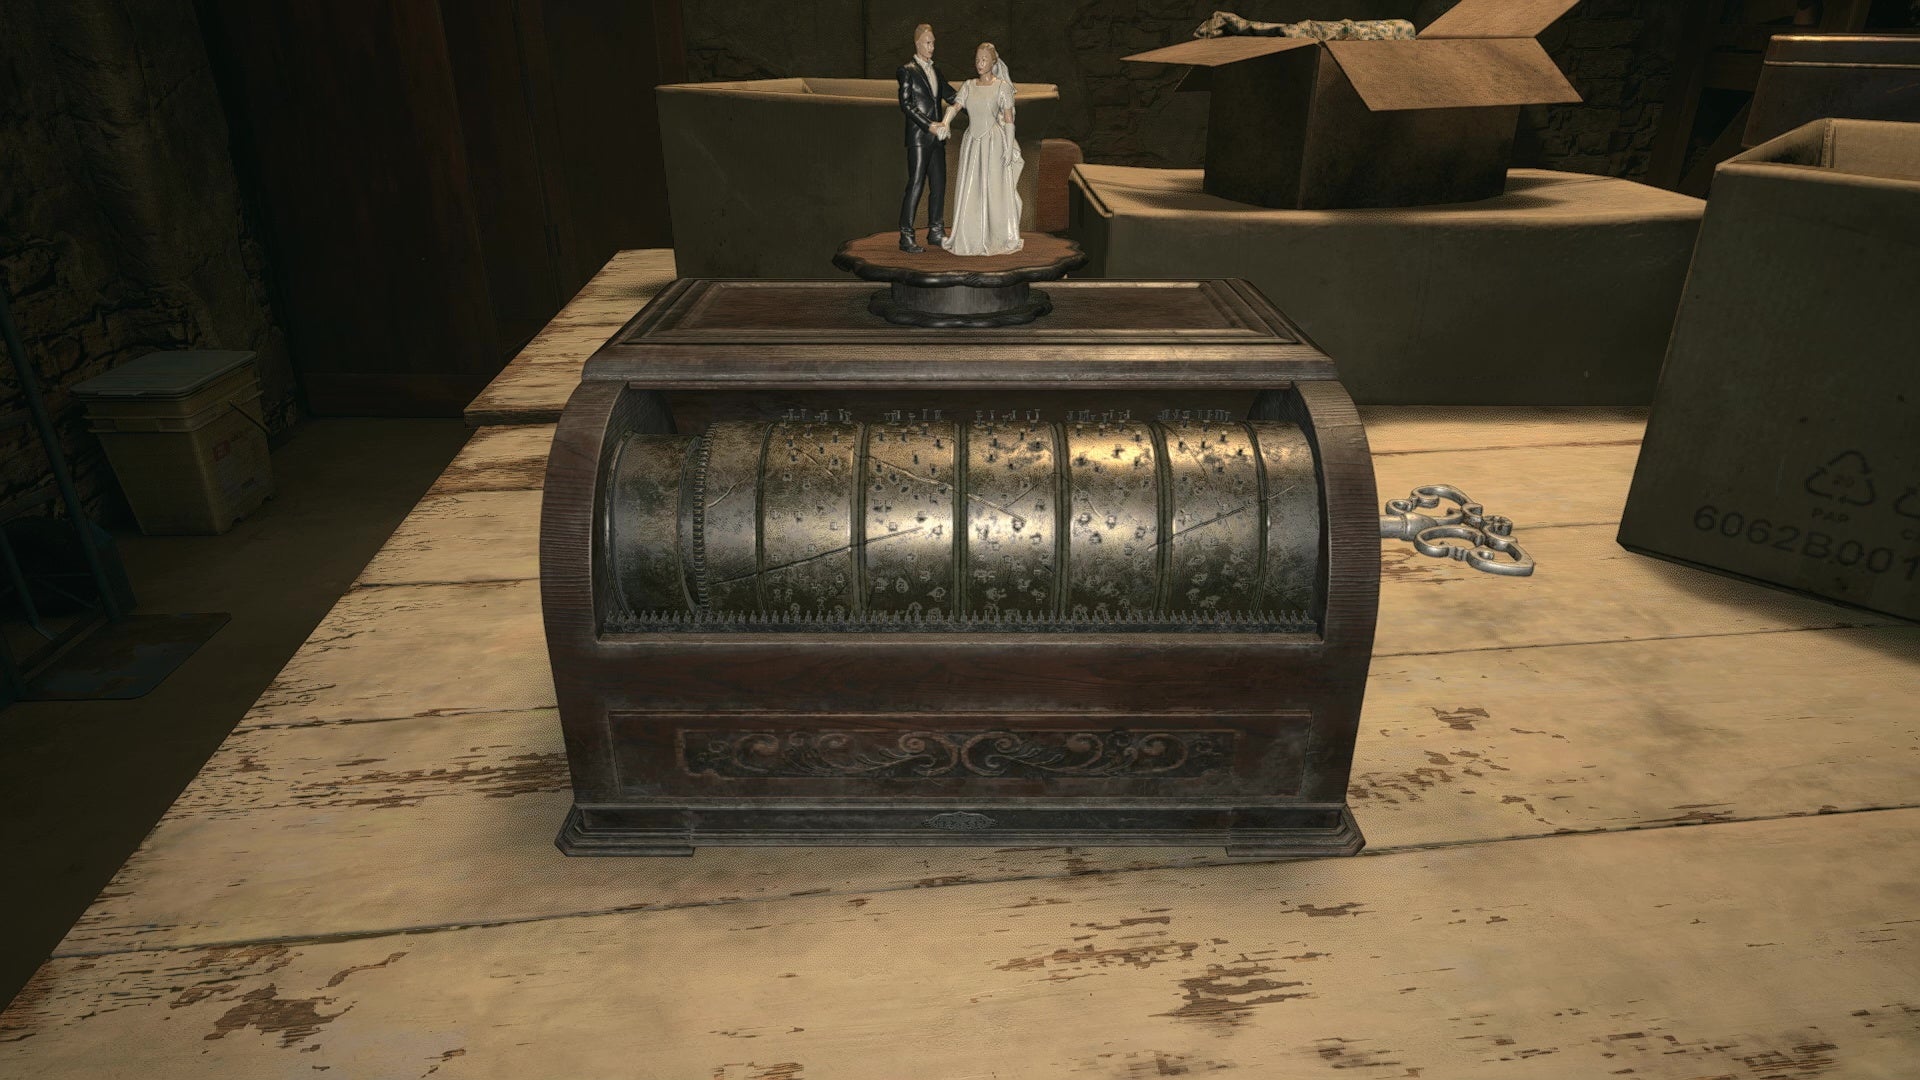 The solution to the music box puzzle in Resident Evil Village, with all the cylinders matched up correctly.